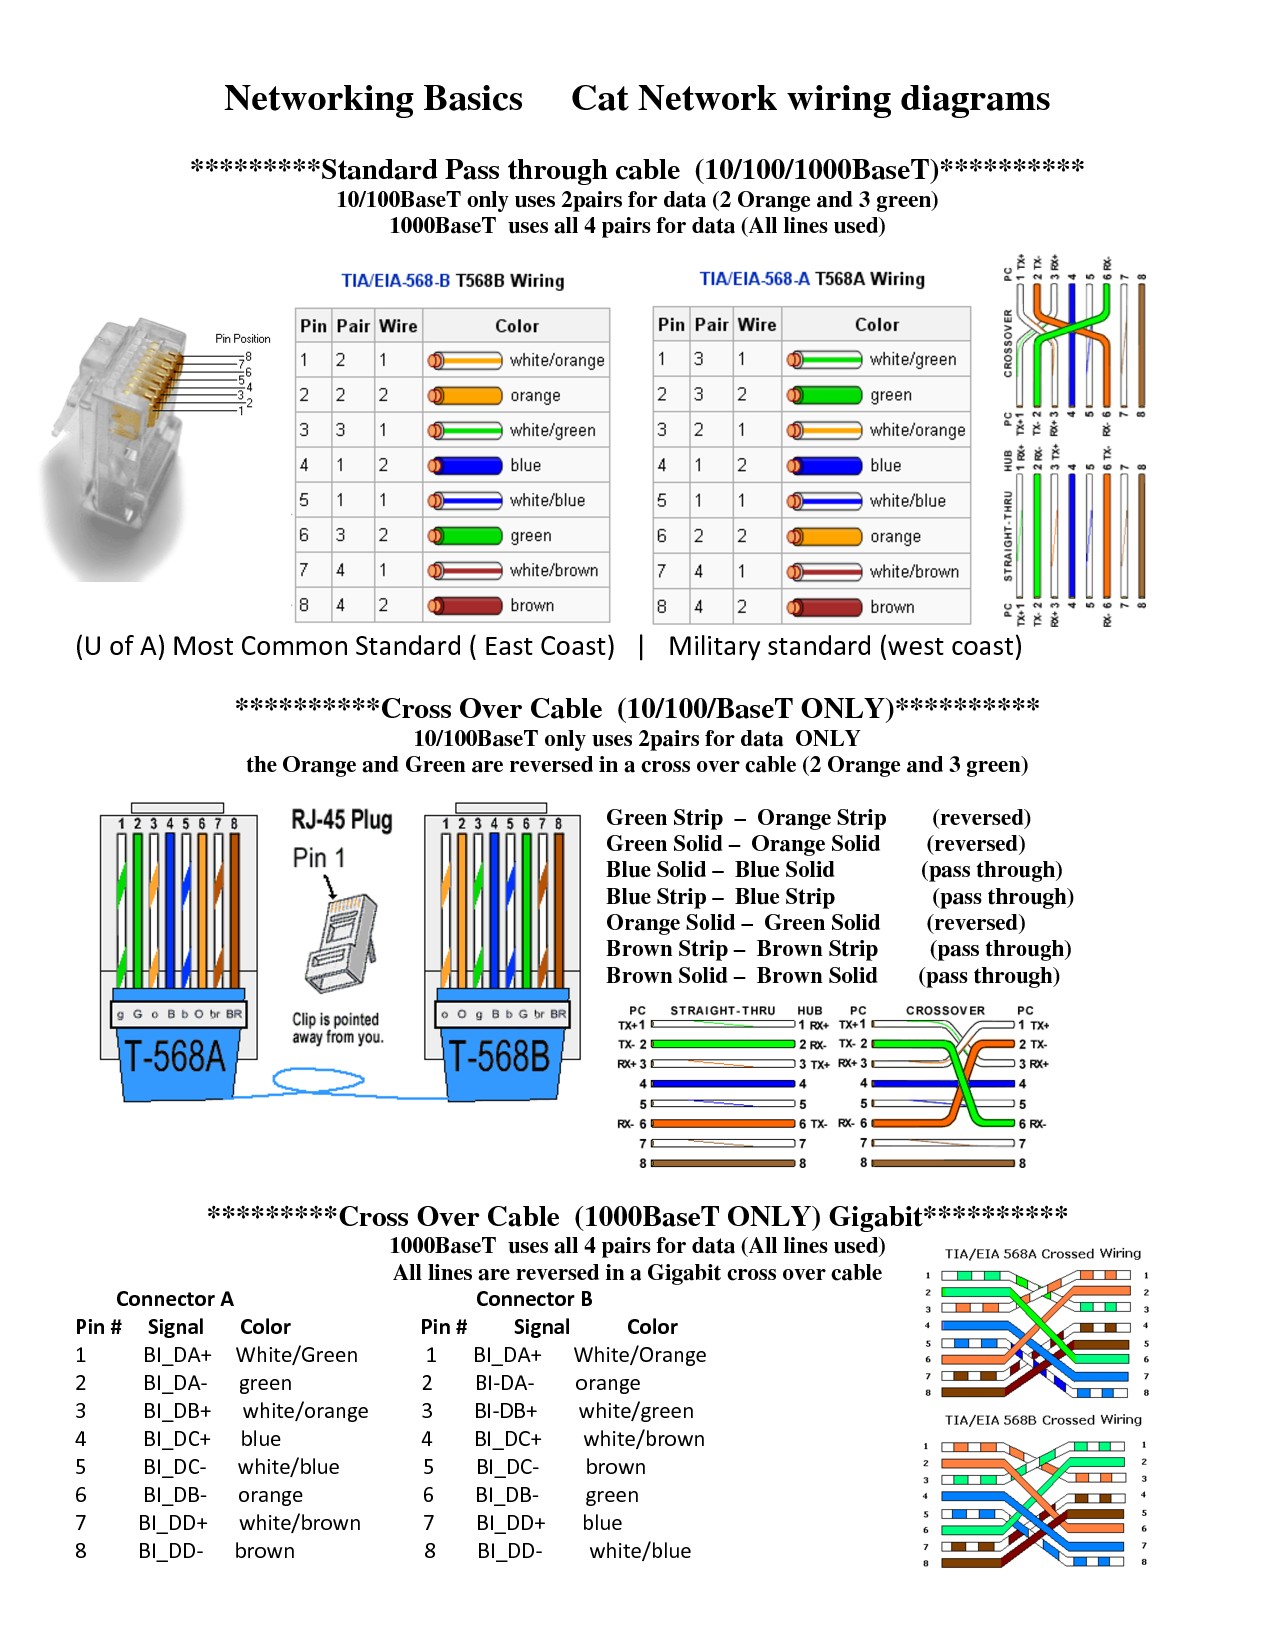 Cat 6 Wiring Diagram Beautiful Cat6 Cable Crimping Gallery Everything You Need to Know Of Cat 6 Wiring Diagram